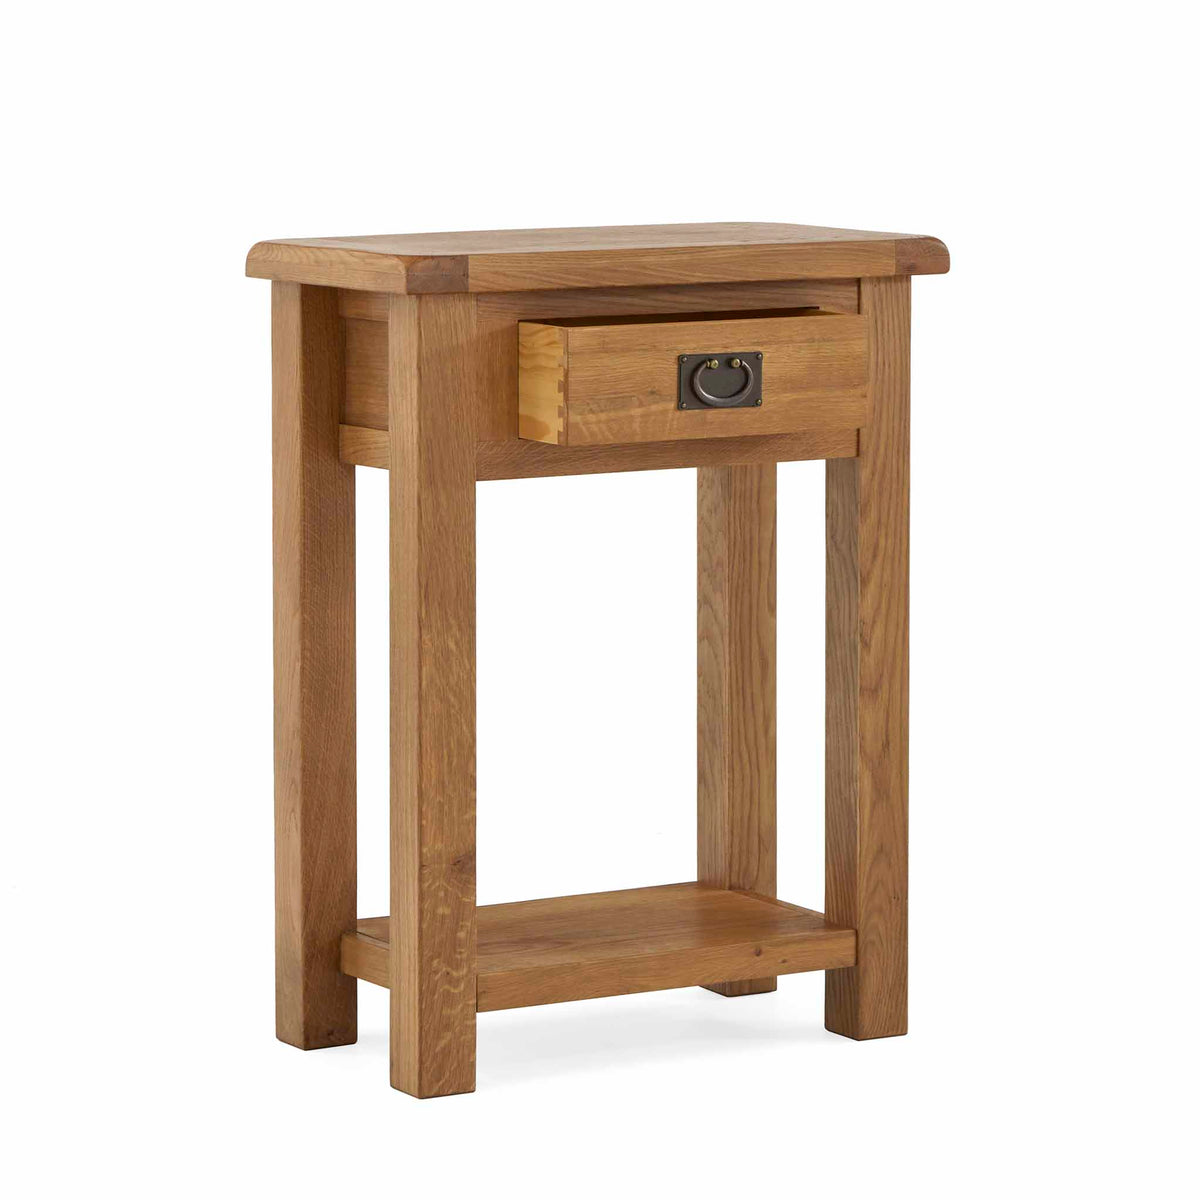 Zelah Oak Telephone Table - Side view with drawer open